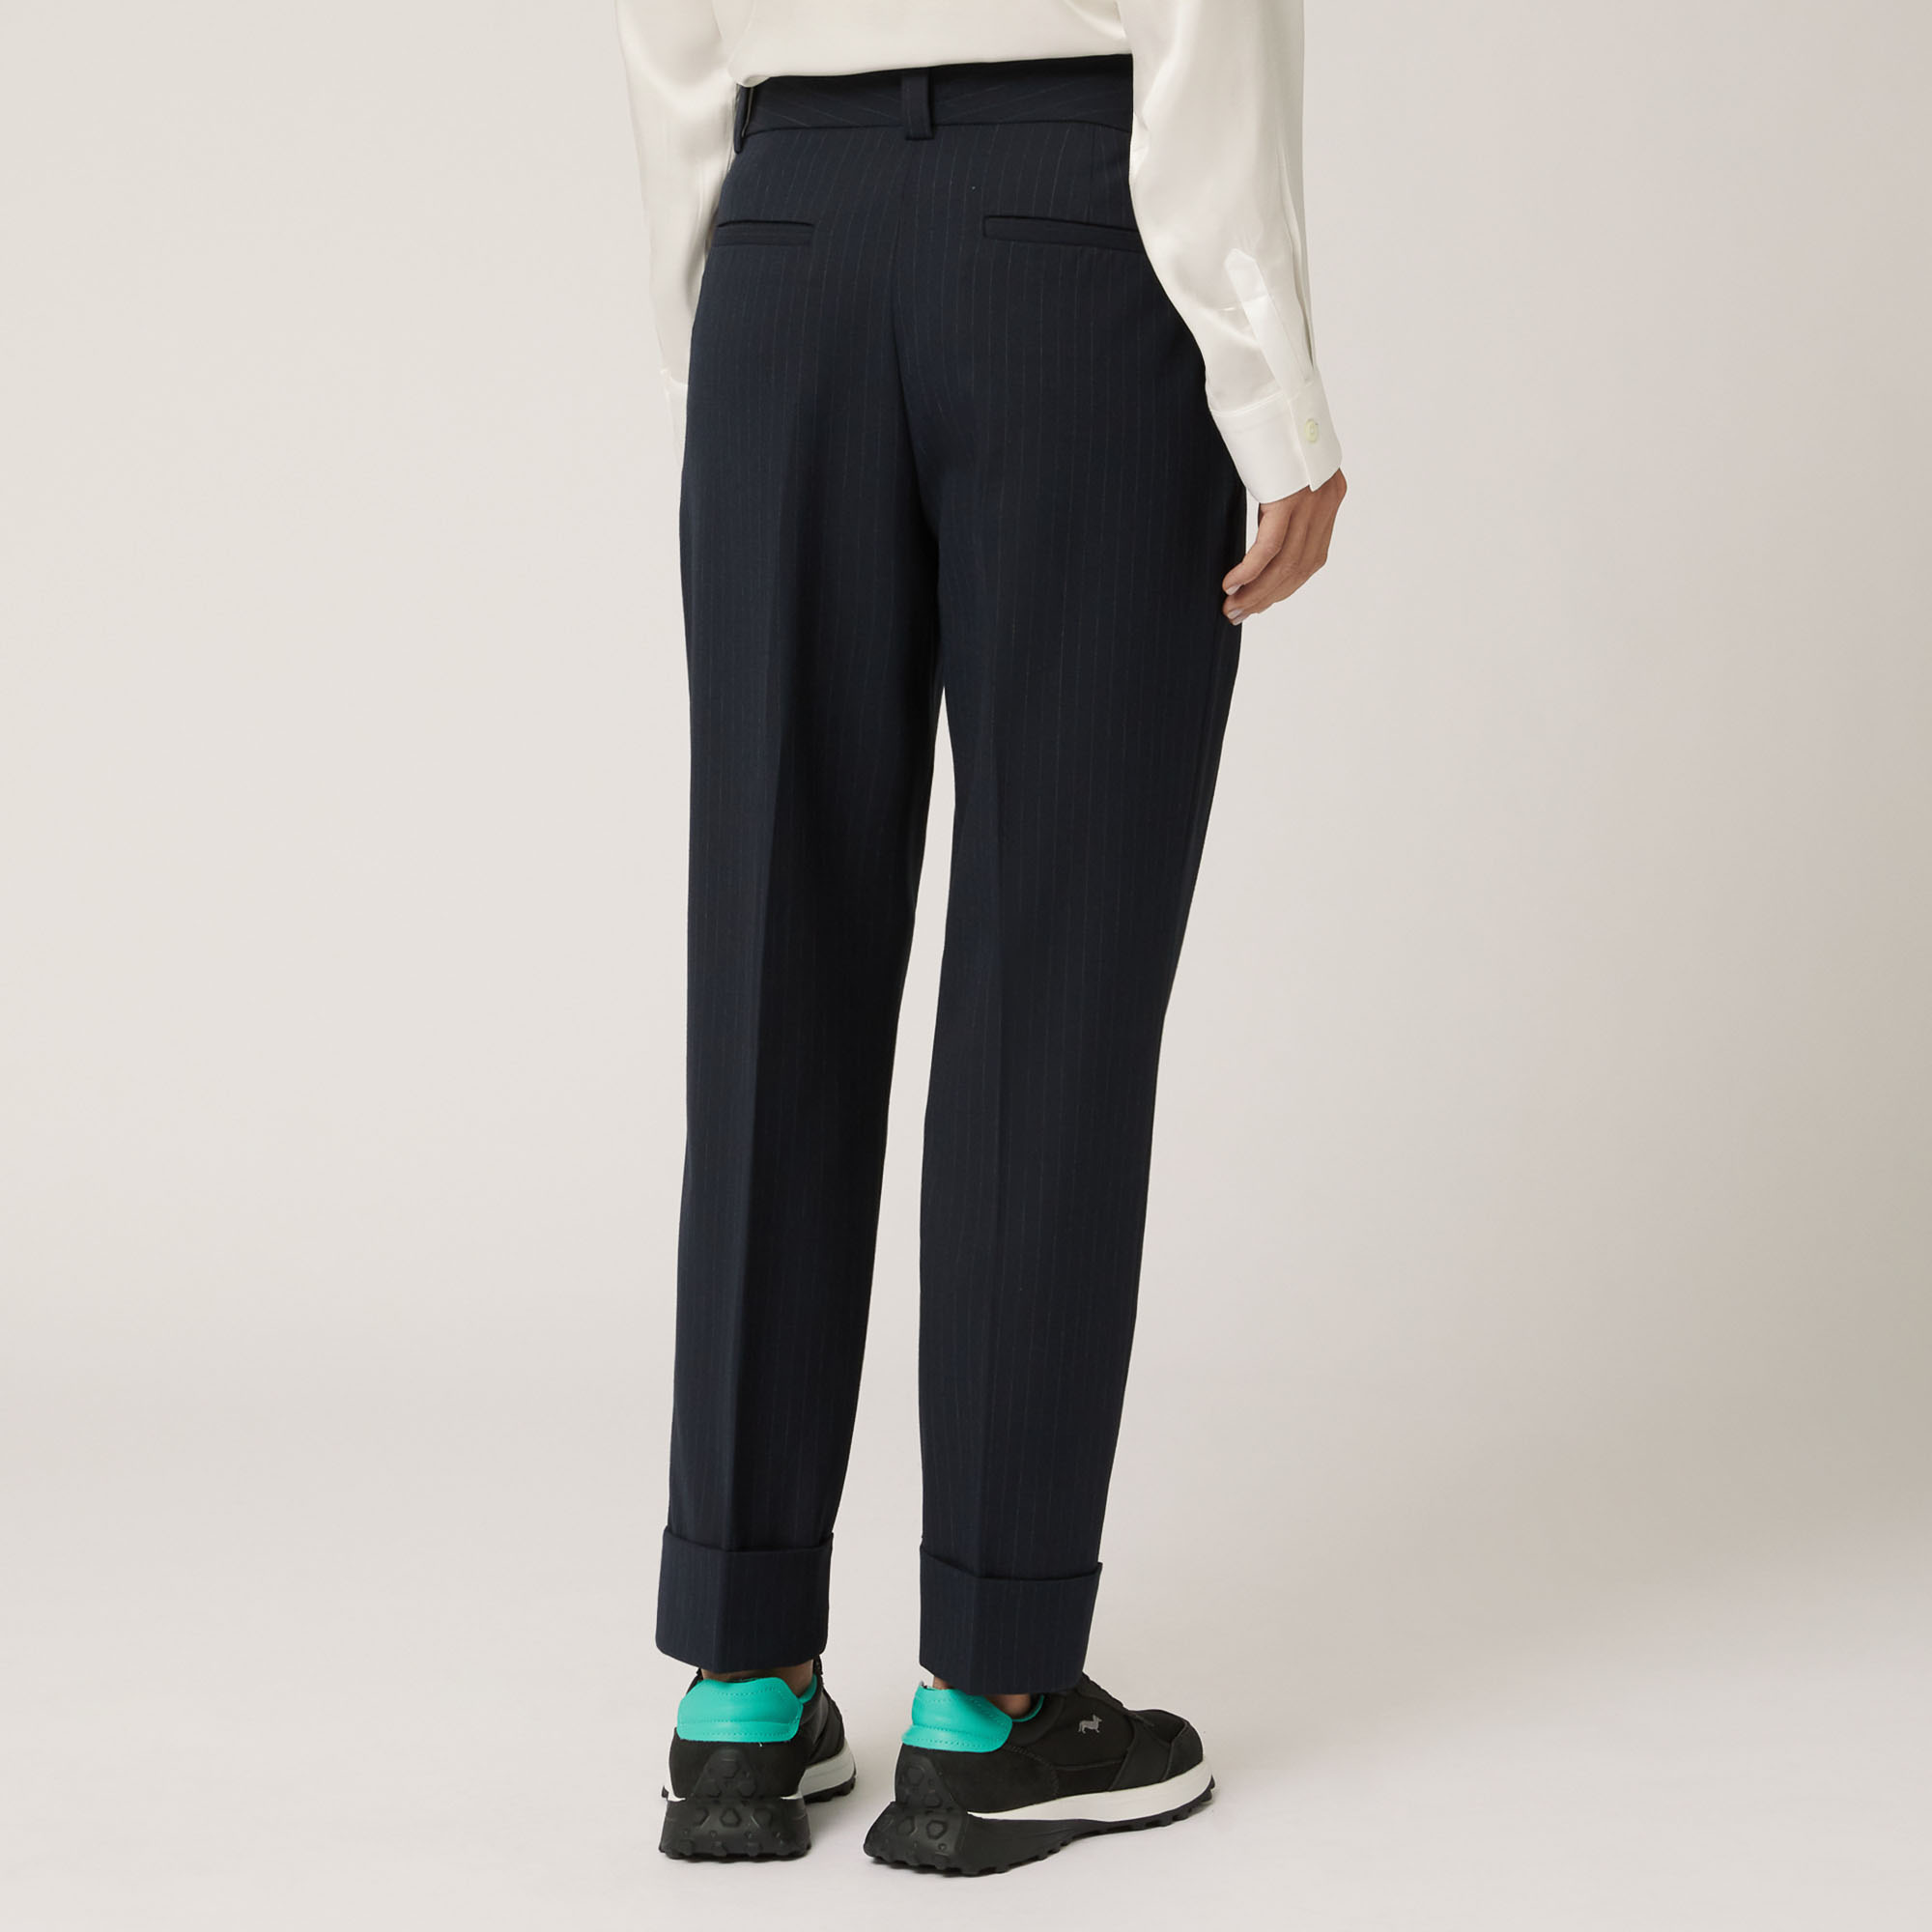 Soft Pants With Pleats And Turn-Up